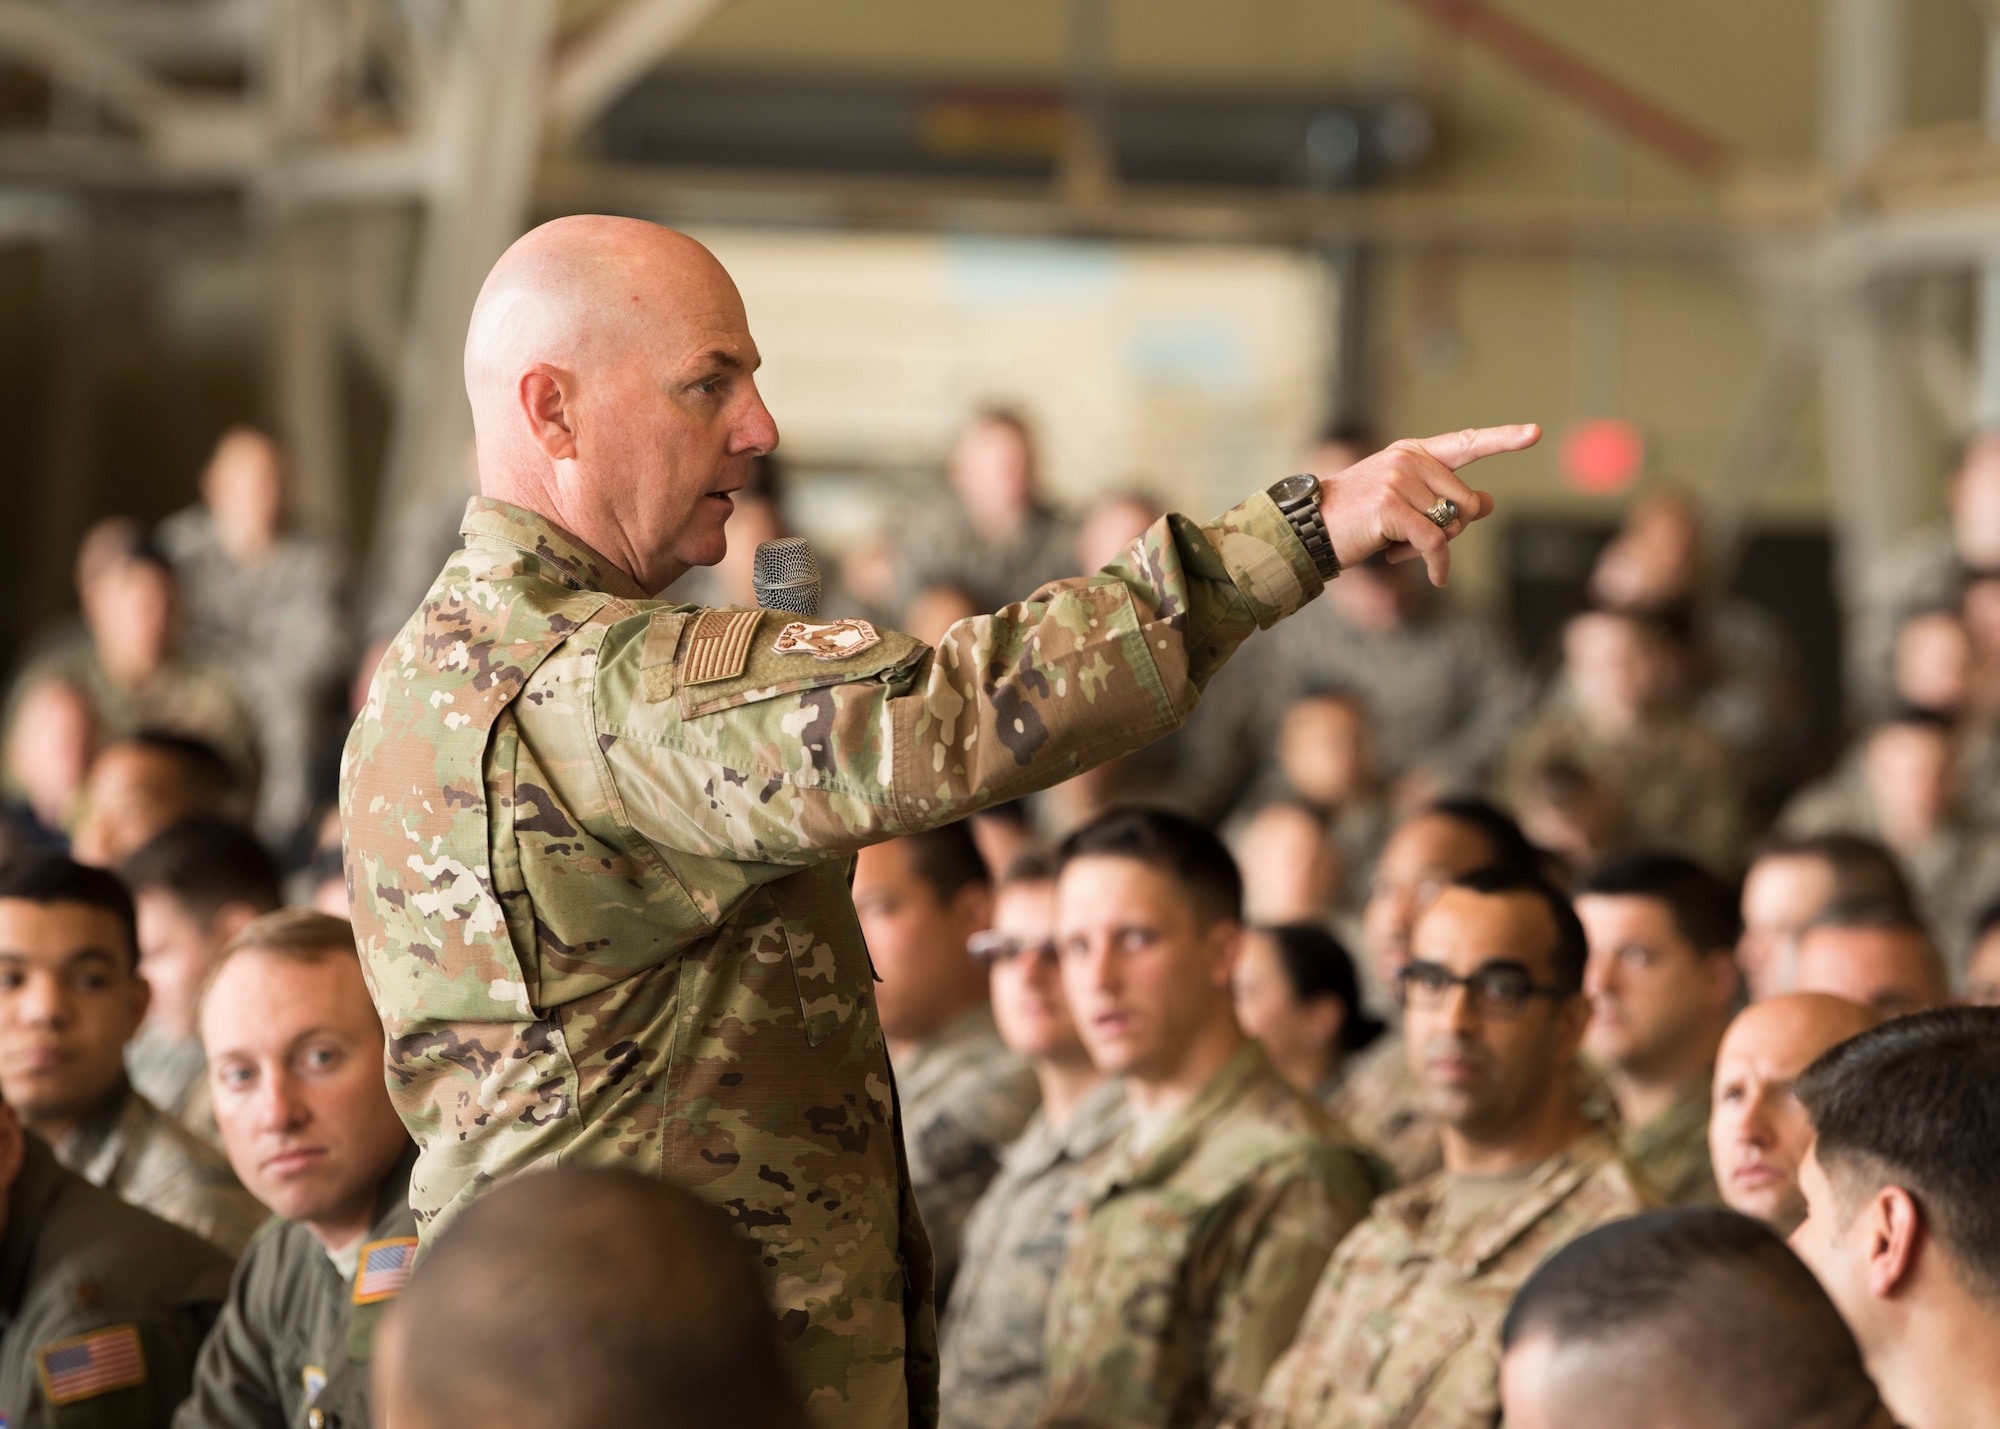 Maj. Gen. Sam Barrett, 18th Air Force commander, speaks to Airmen from the 92nd Air Refueling Wing May 23, 2019, at Fairchild Air Force Base, Washington. In September, Team Fairchild is scheduled to host more than 2,000 Department of Defense personnel and international partners during Air Mobility Command’s premiere exercise, Mobility Guardian. The exercise will put participants to the test during realistic combat scenarios to train like they fight: together. (U.S. Air Force photo by Senior Airman Ryan Lackey)